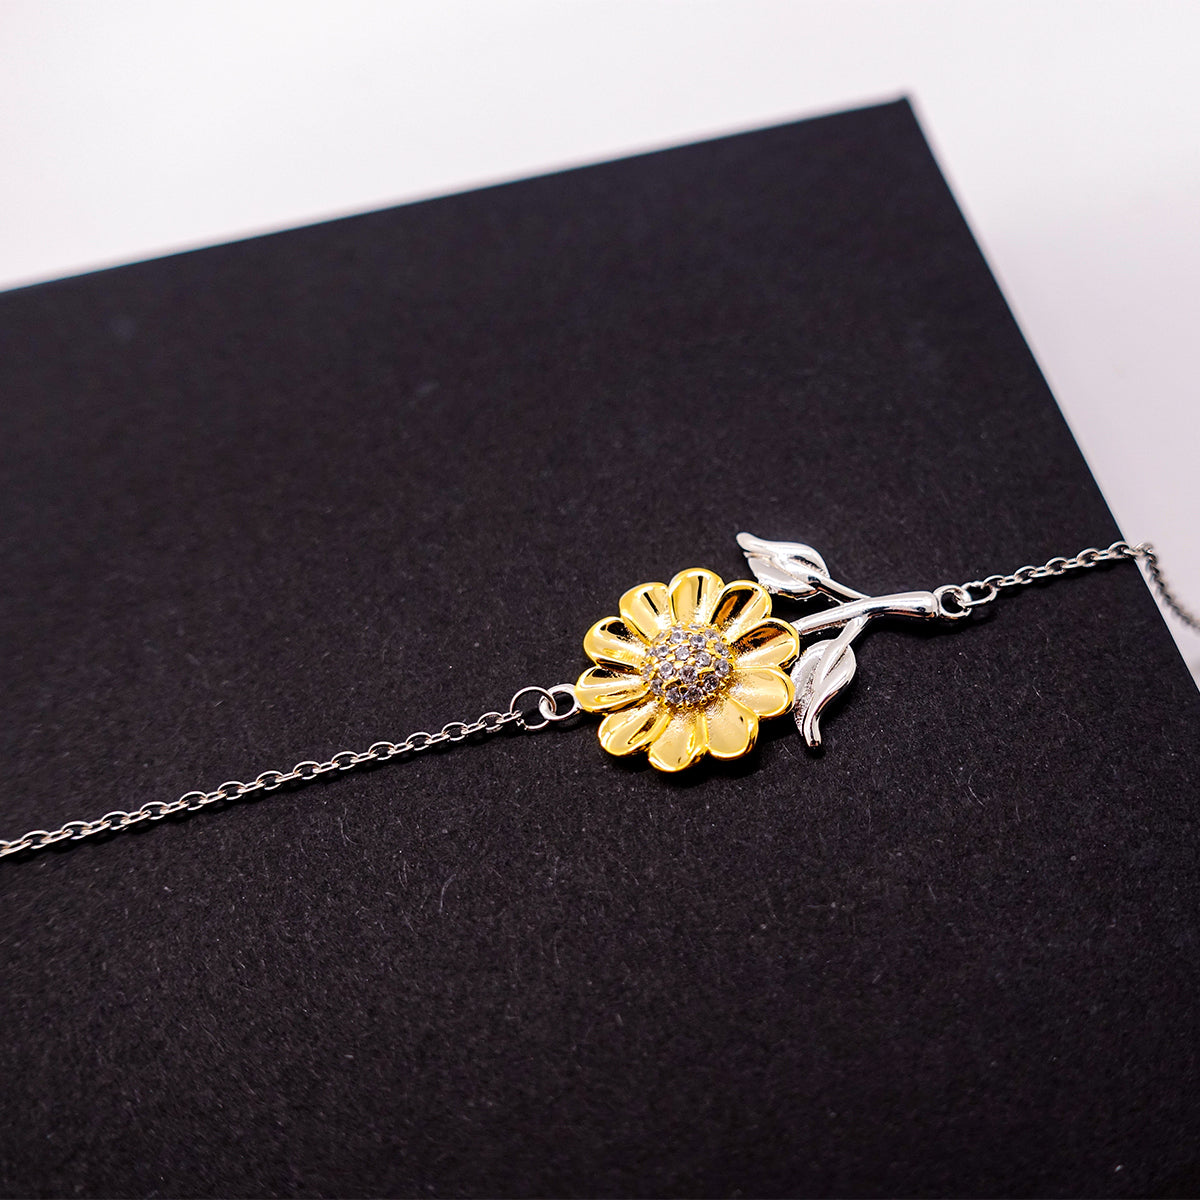 Grandma Sunflower Bracelet - A Perfect Gift to Show Love and Appreciation, Special Occasion, Inspirational Jewelry for Grandma